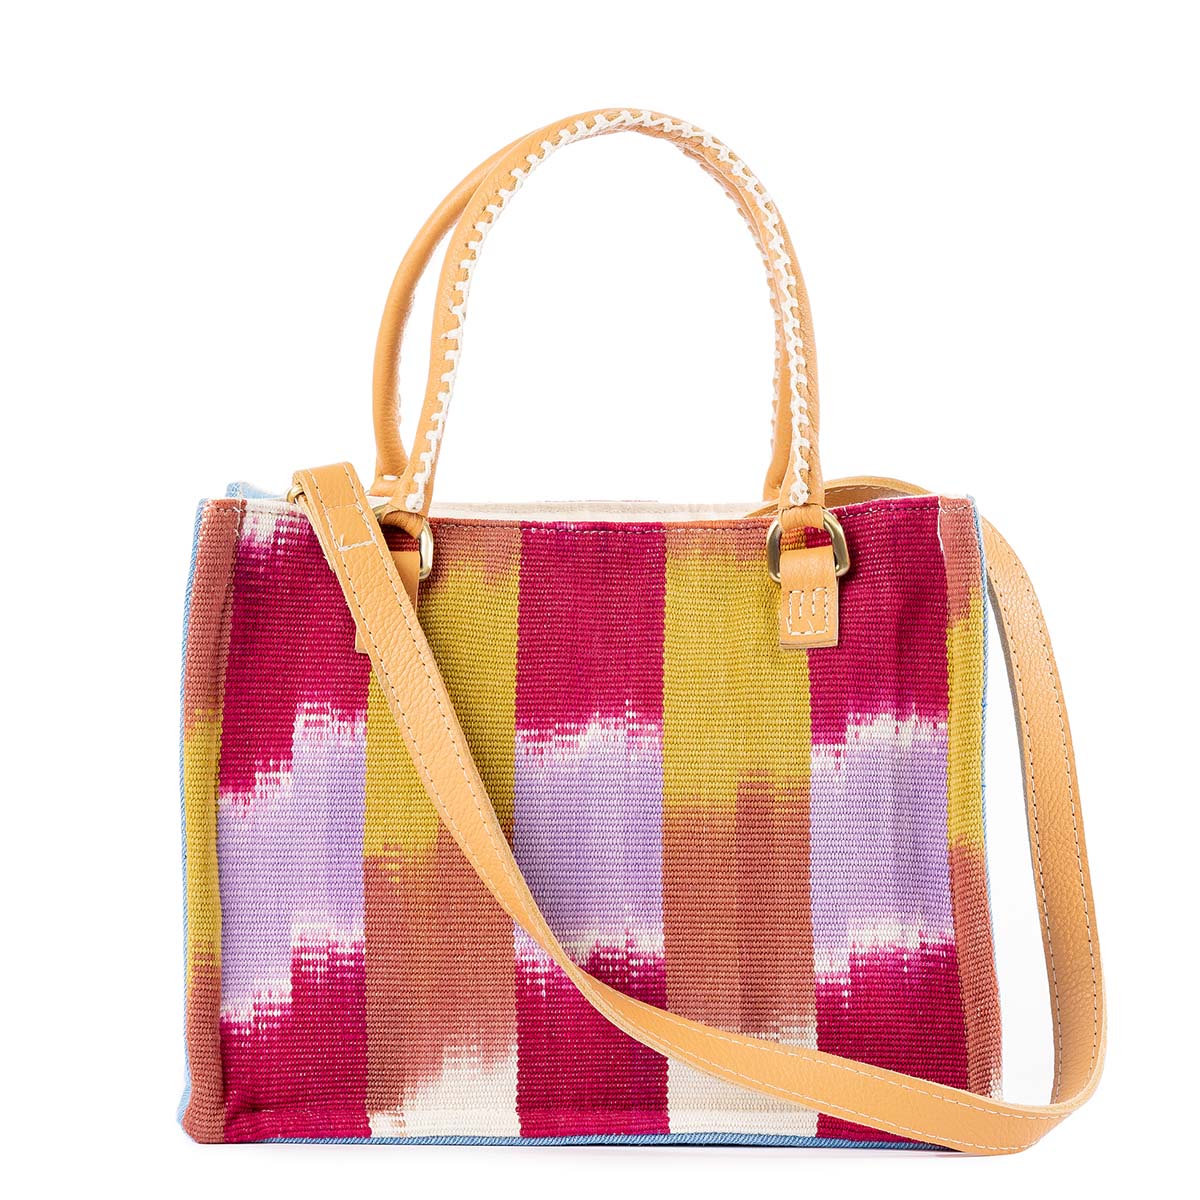 The front of the hand woven artisan Mini Irma Tote in Raspberry Paleta. It has a flame stitch red, orange, yellow, purple, and white stripes. It has leather handles with white embroidery and a detachable leather strap.